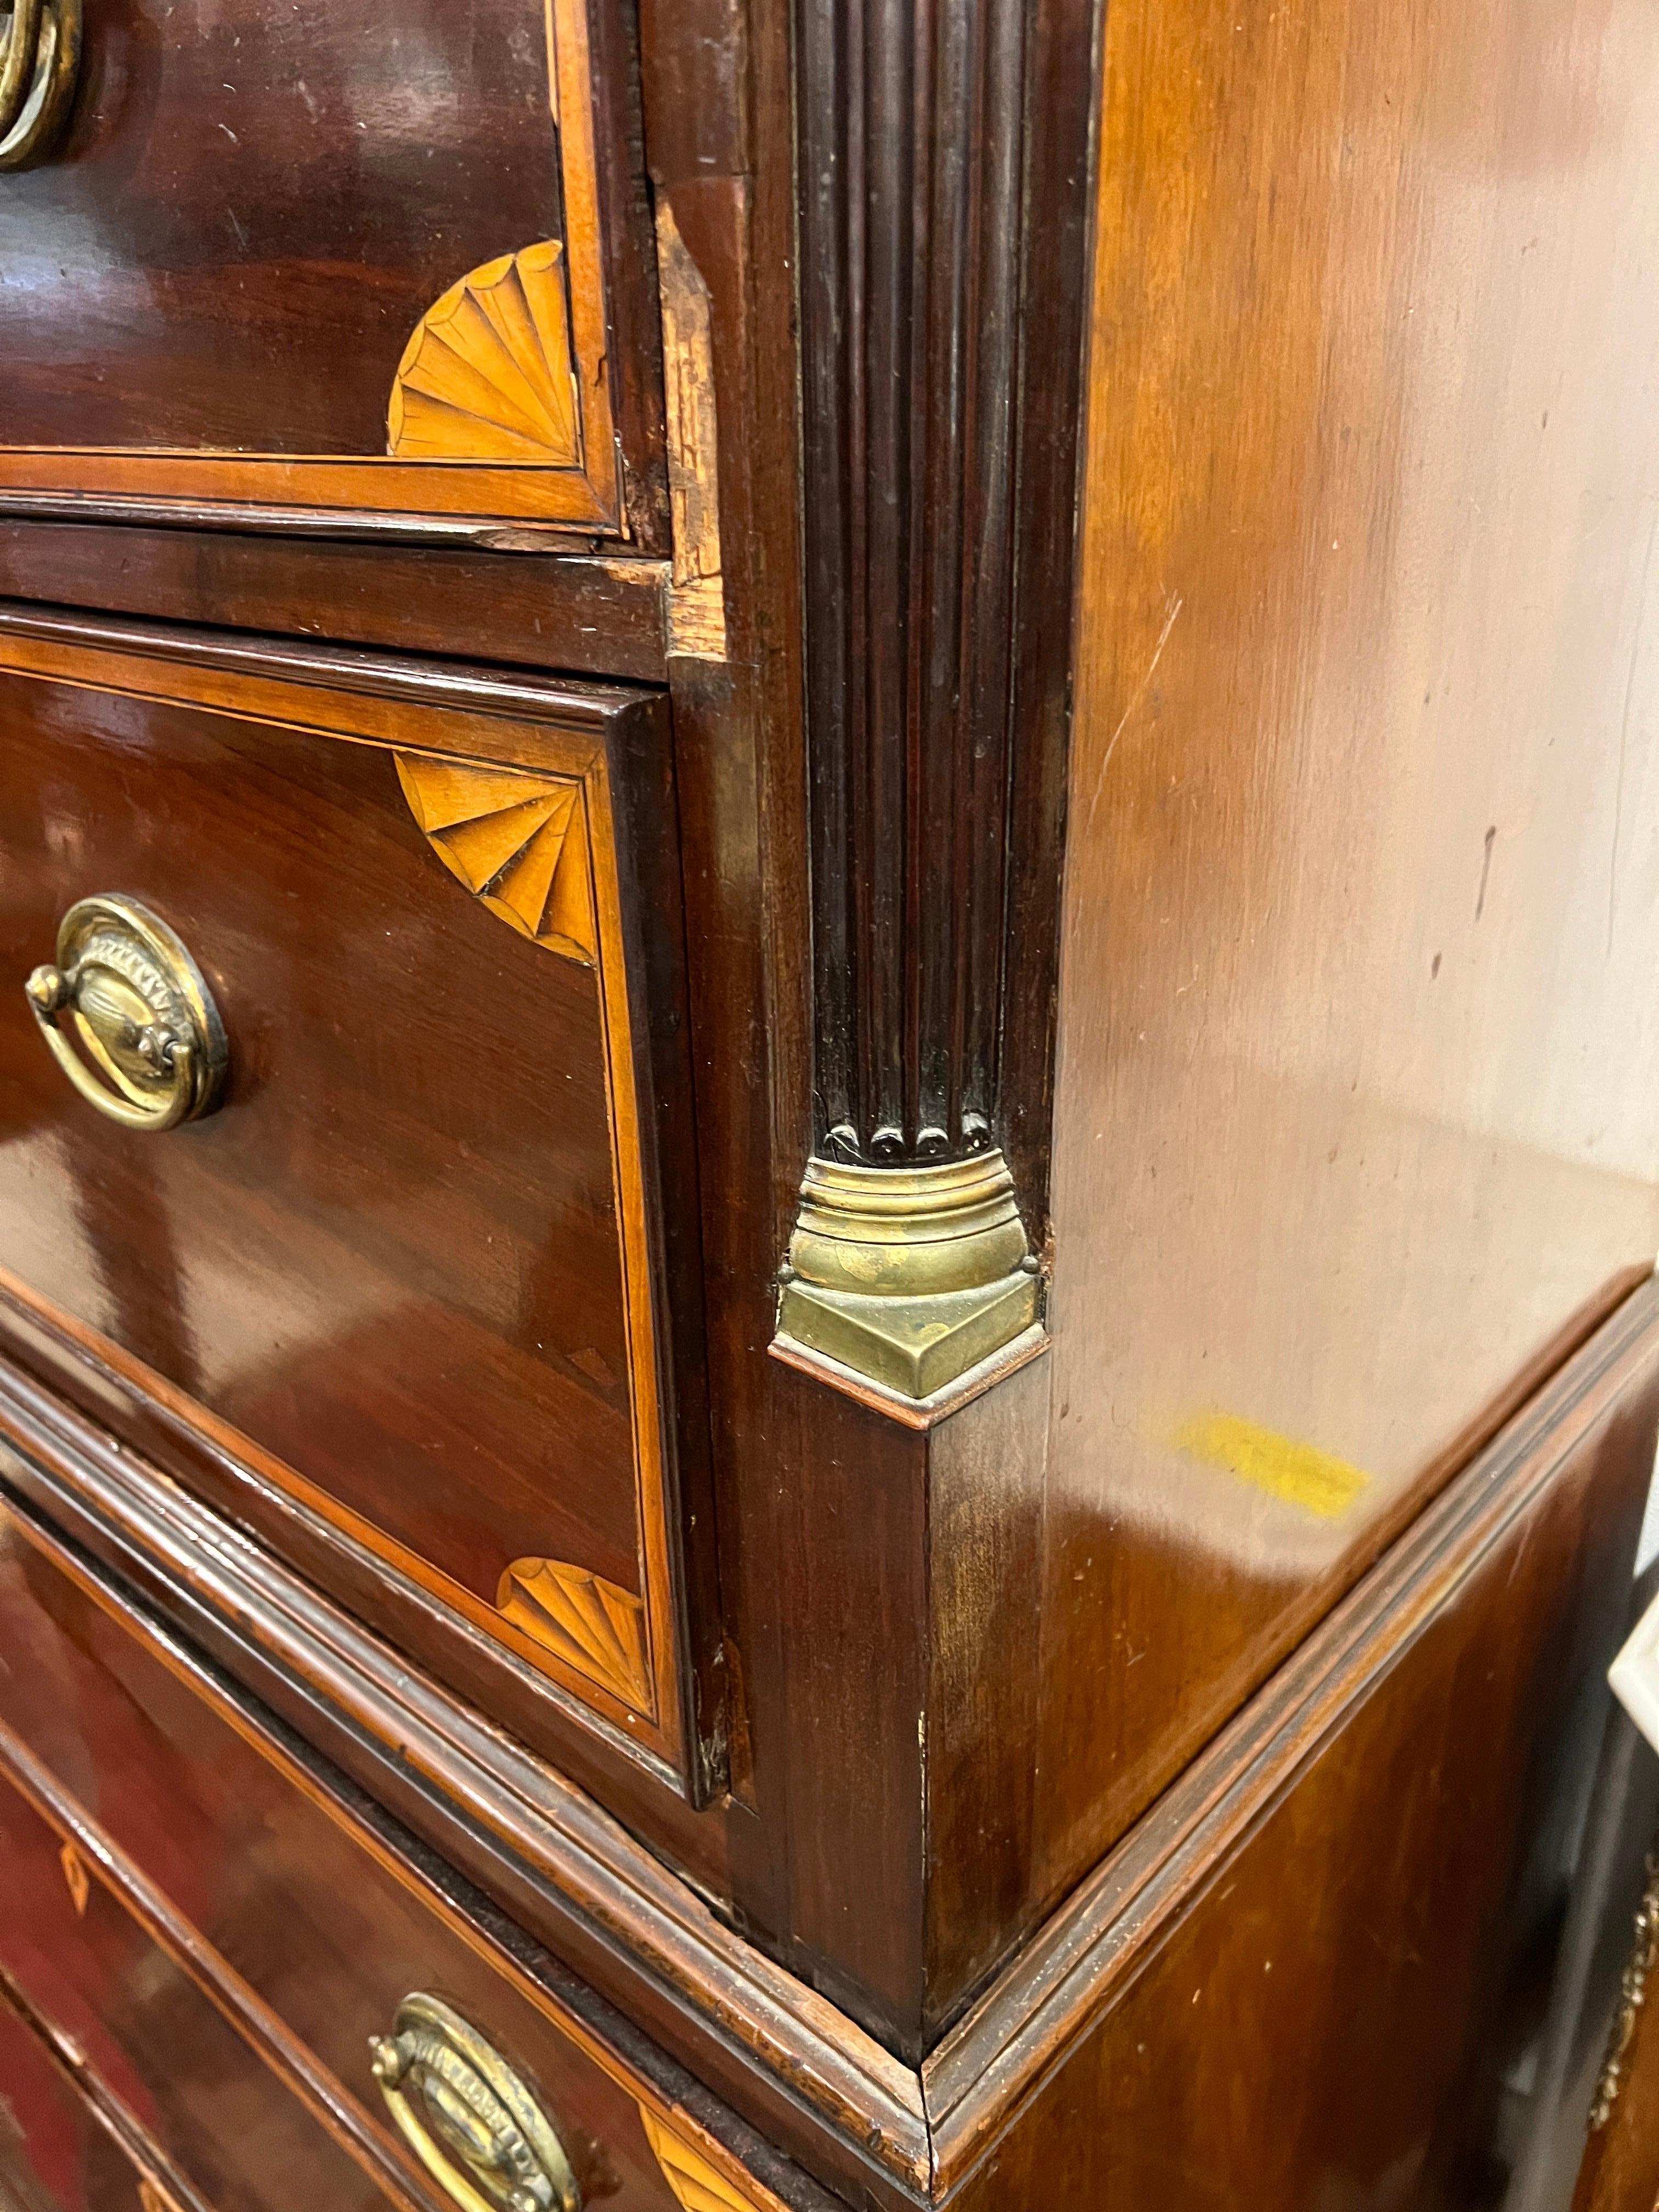 18th Century English George III Mahogany Inlaid Secretaire Chest of Drawers 1700 For Sale 7